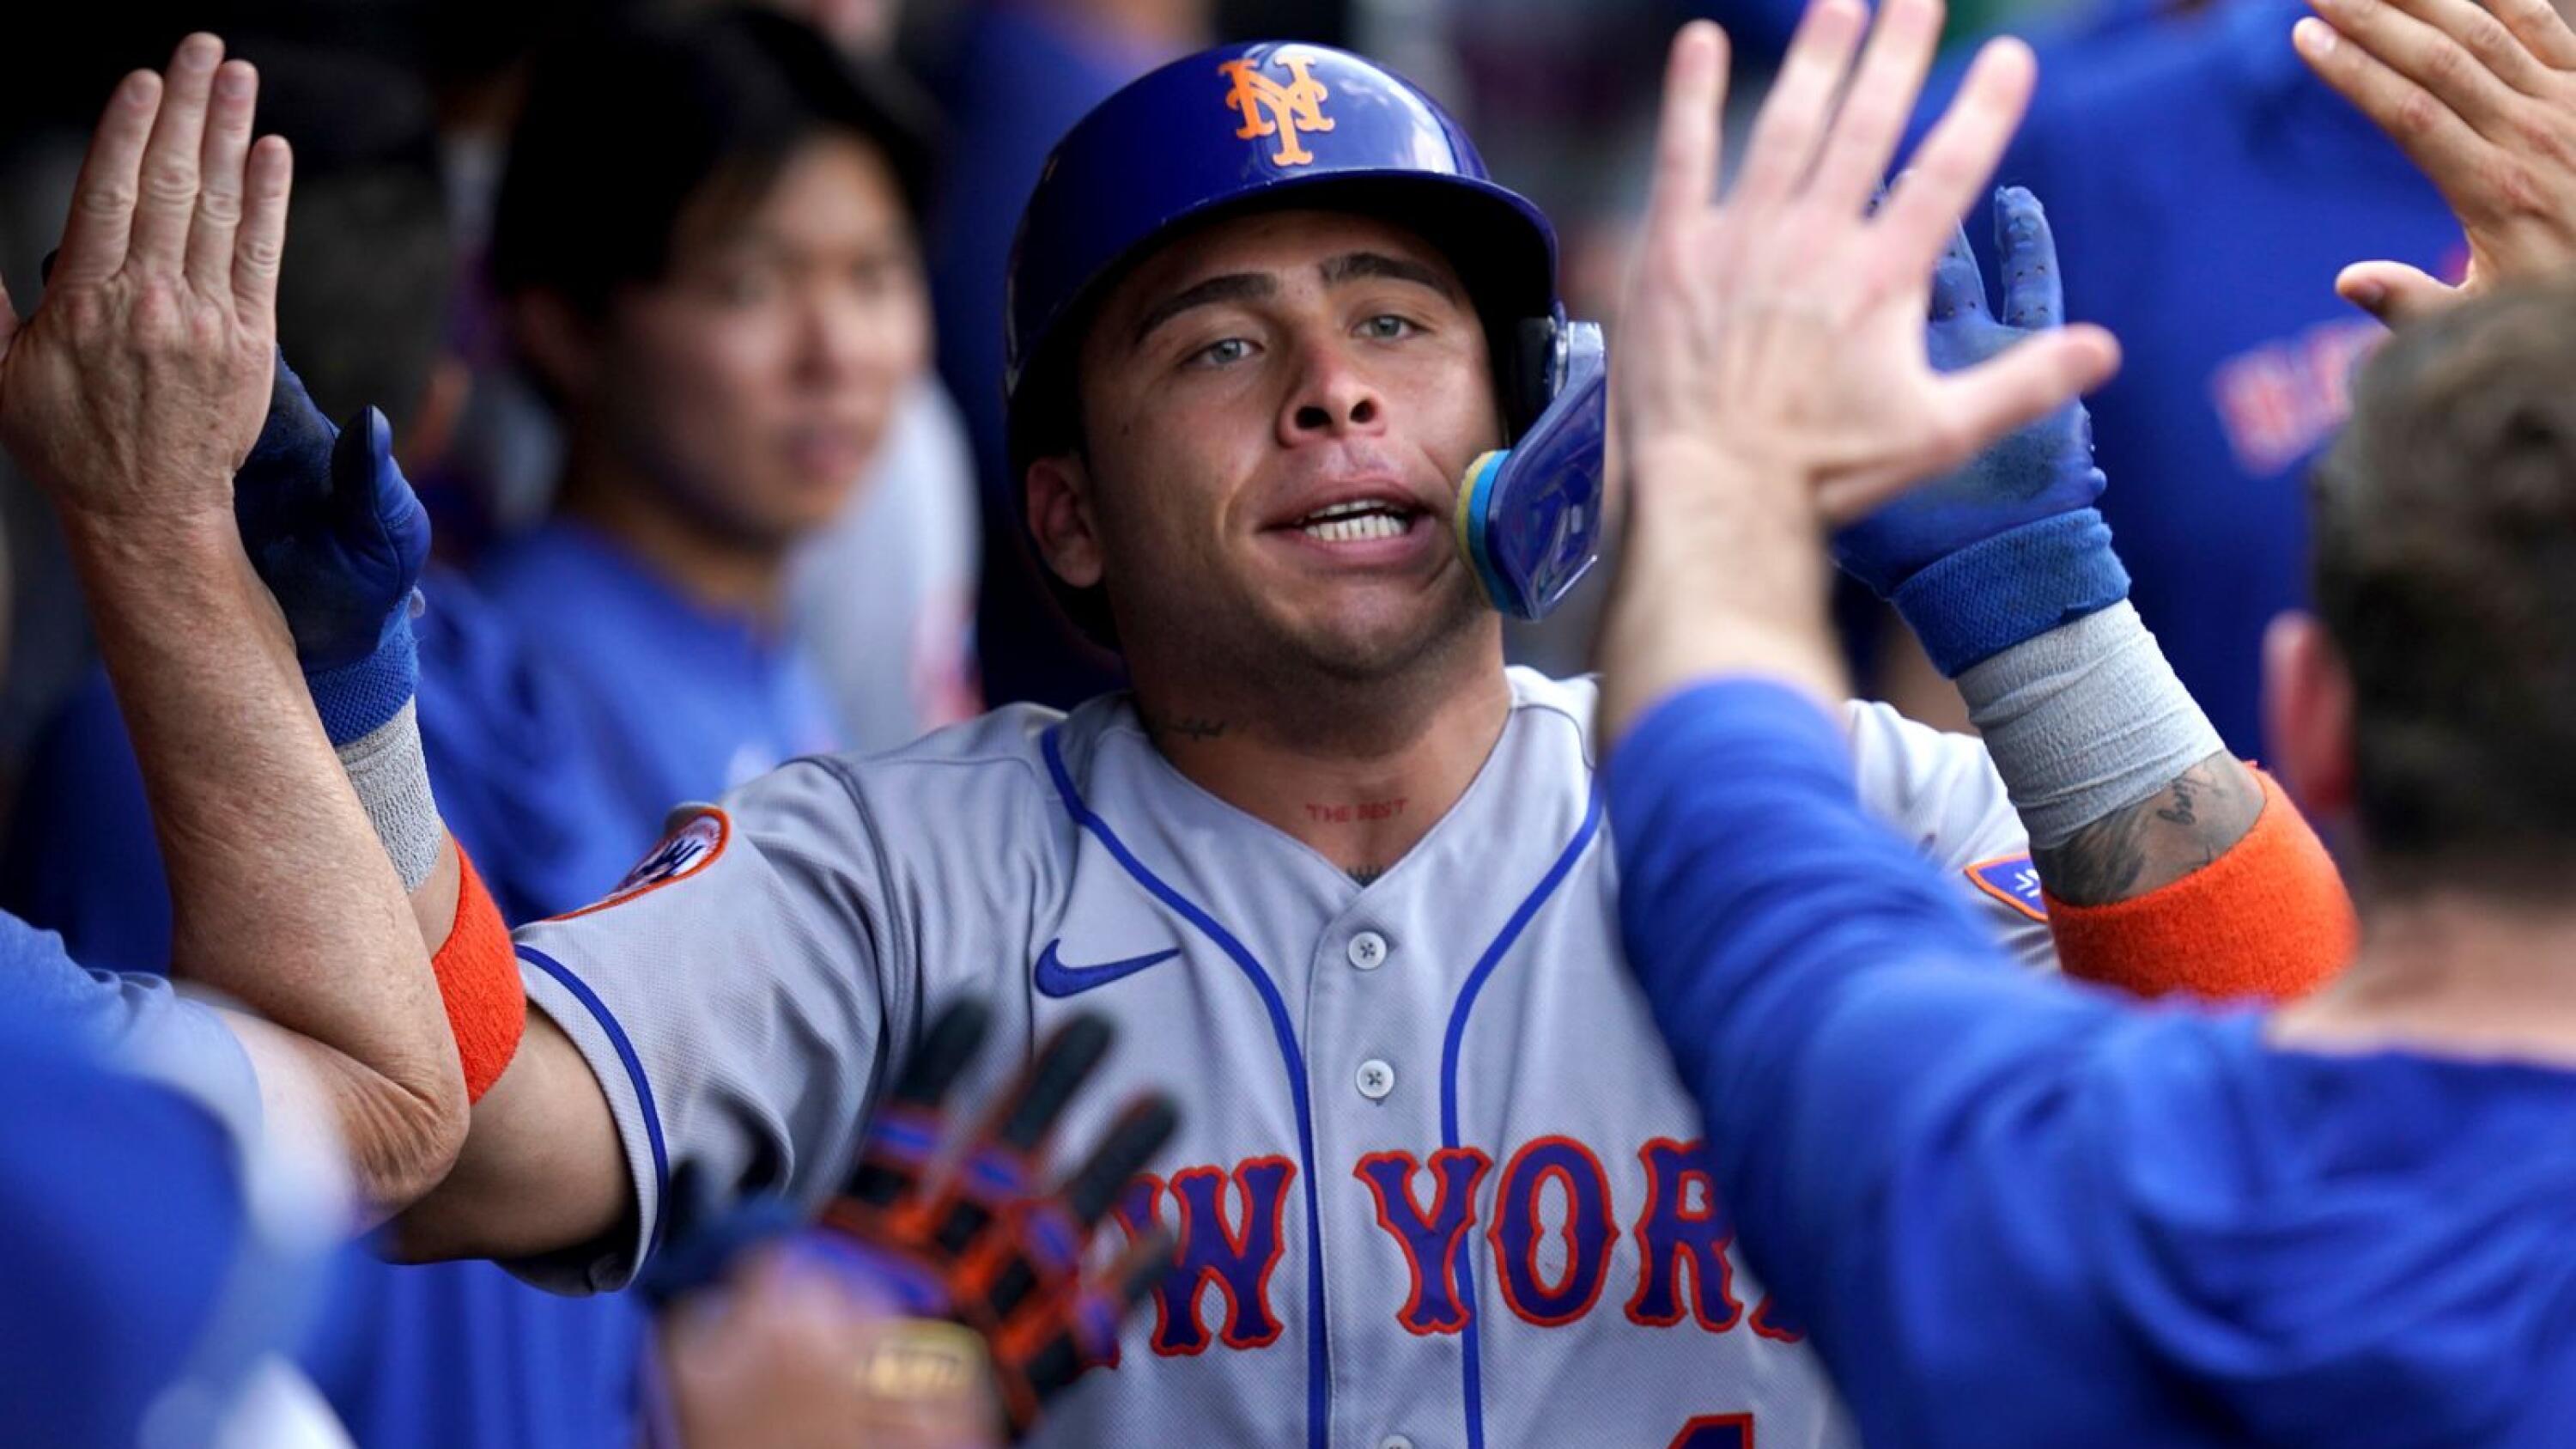 Mets stop 7-game skid, beat Pirates 5-1 behind Canha's 3 RBIs